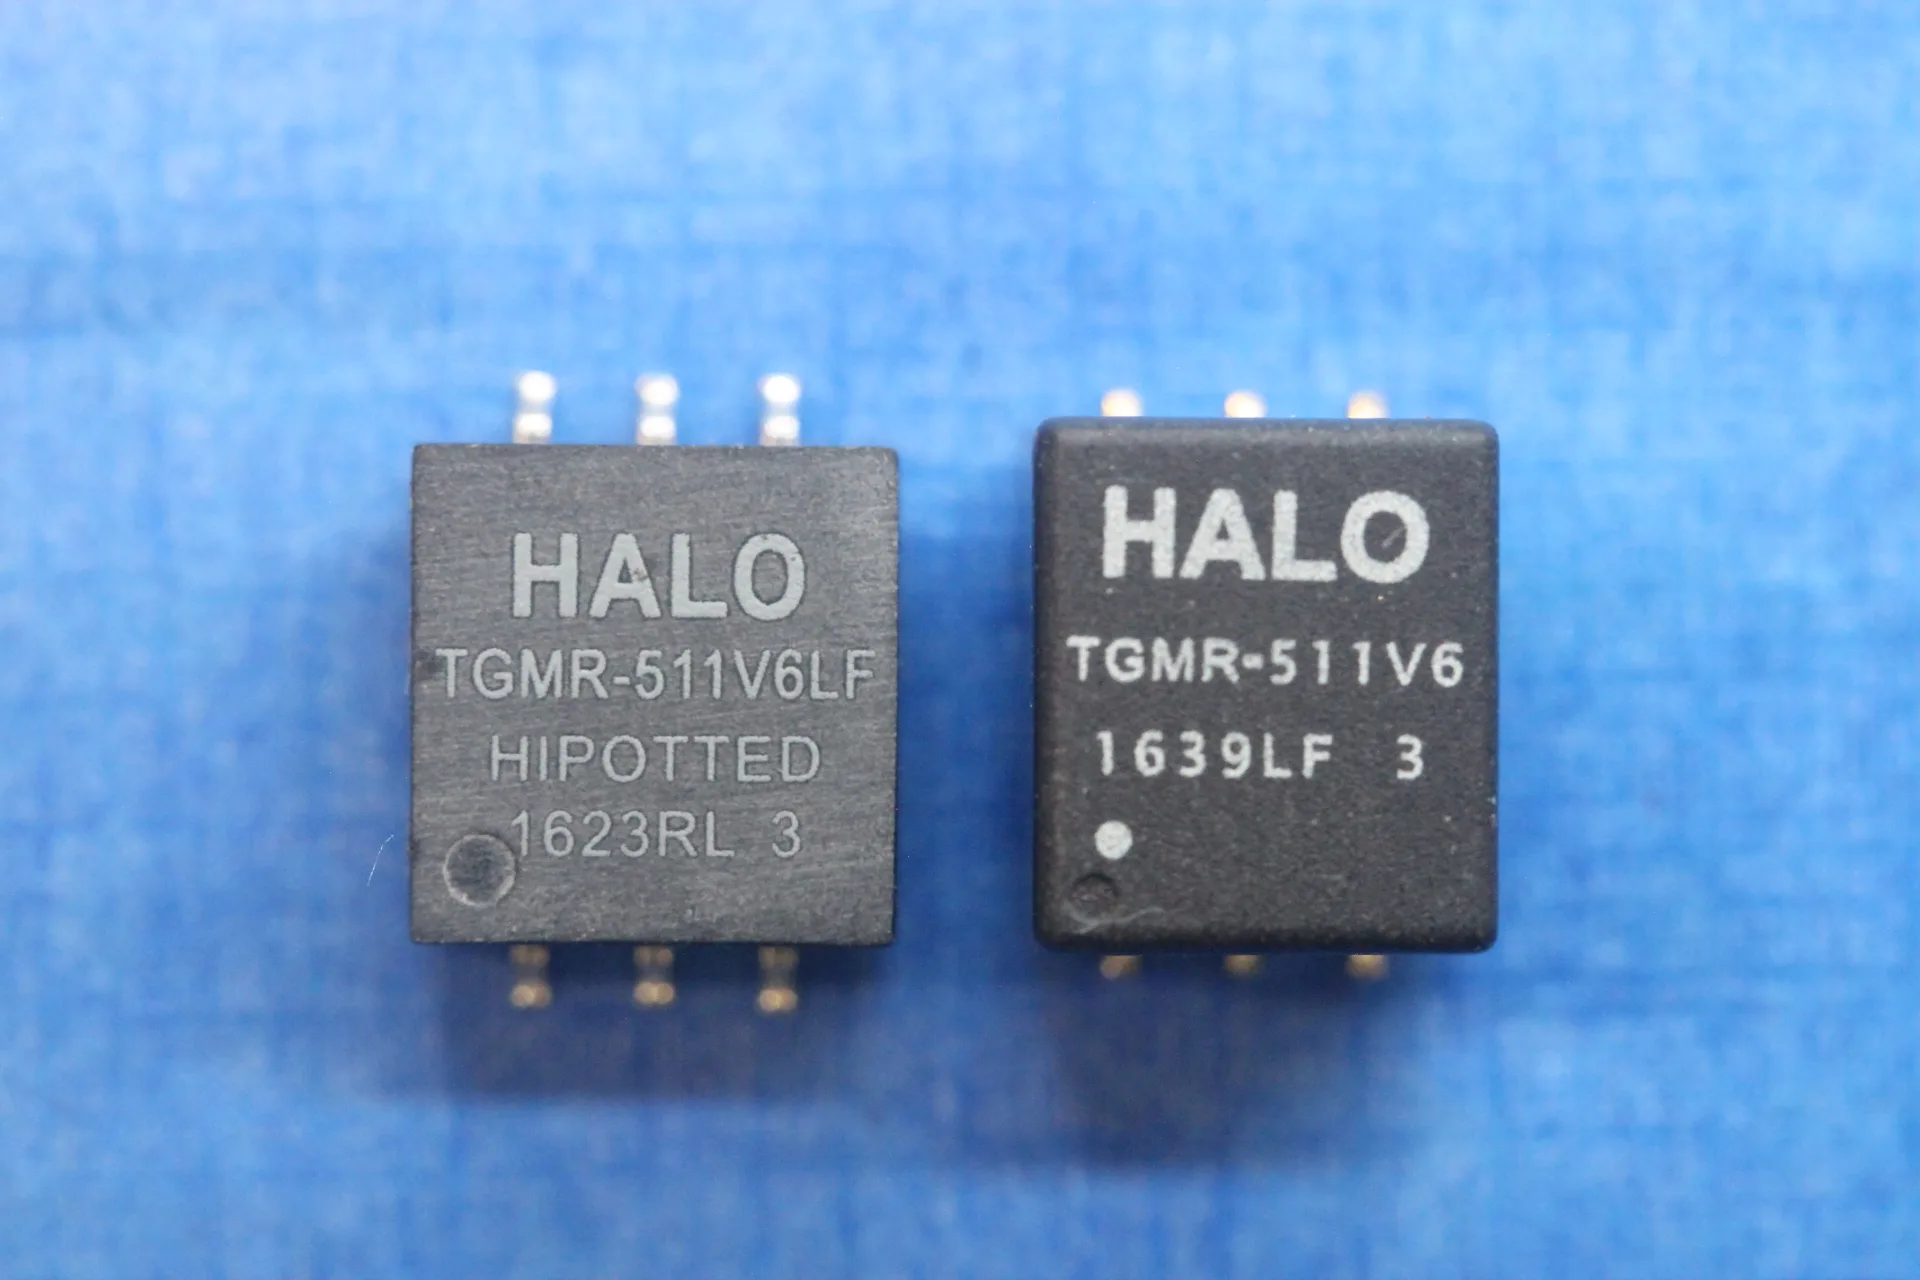 Two electronic components side by side. The two components look similar, but the component on the left looks like it has been sanded down to remove the previous information, and the text font and location is different to the component on the right